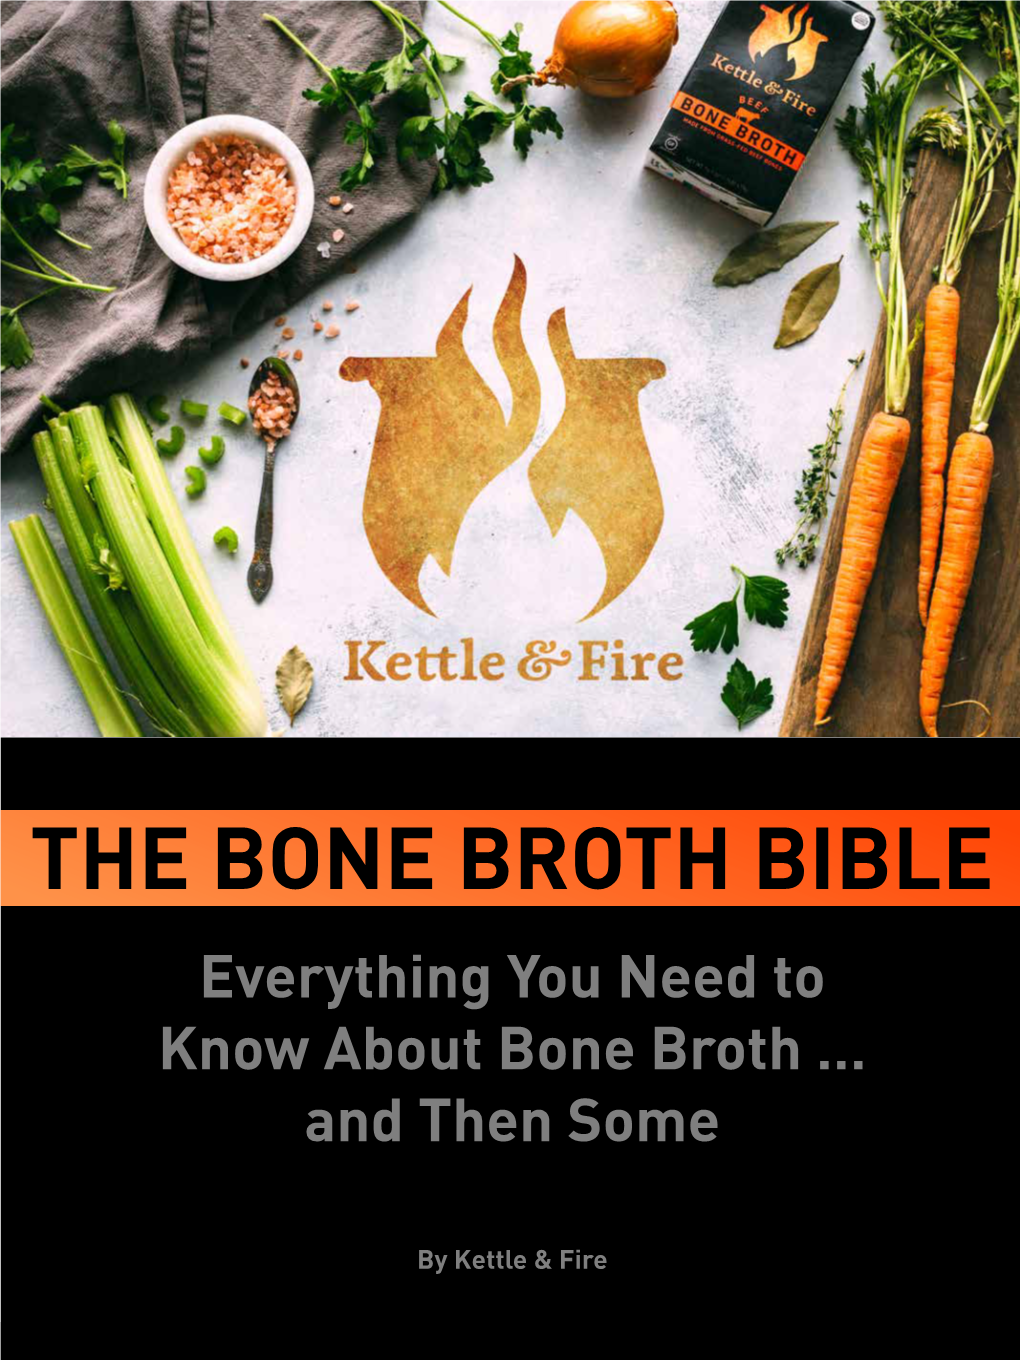 THE BONE BROTH BIBLE Everything You Need to Know About Bone Broth … and Then Some